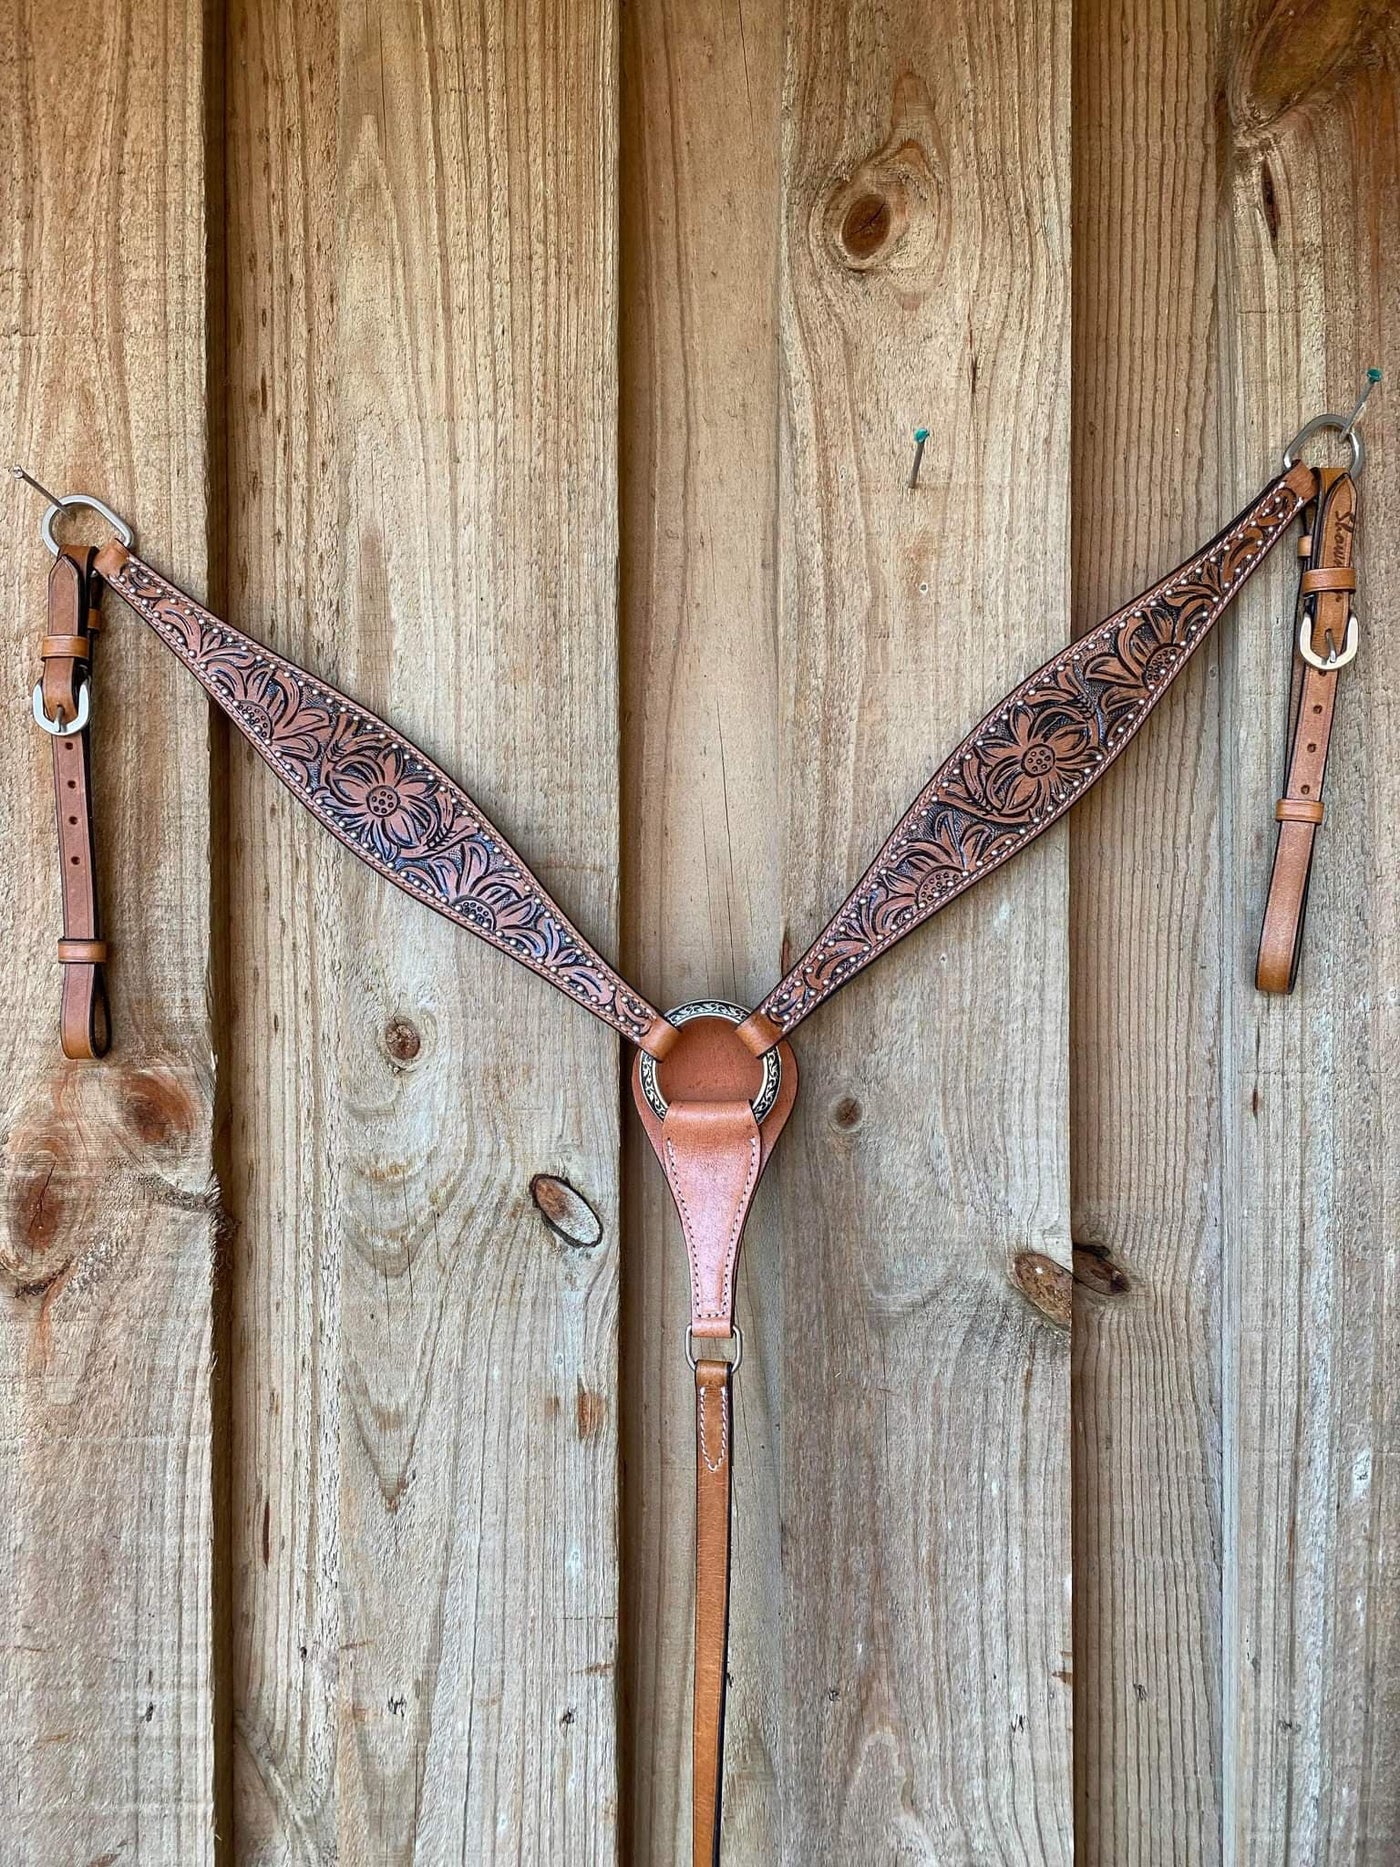 Western Tack Set Floral Tooled Leather Bridle & Breastcollar Cob/Full Size